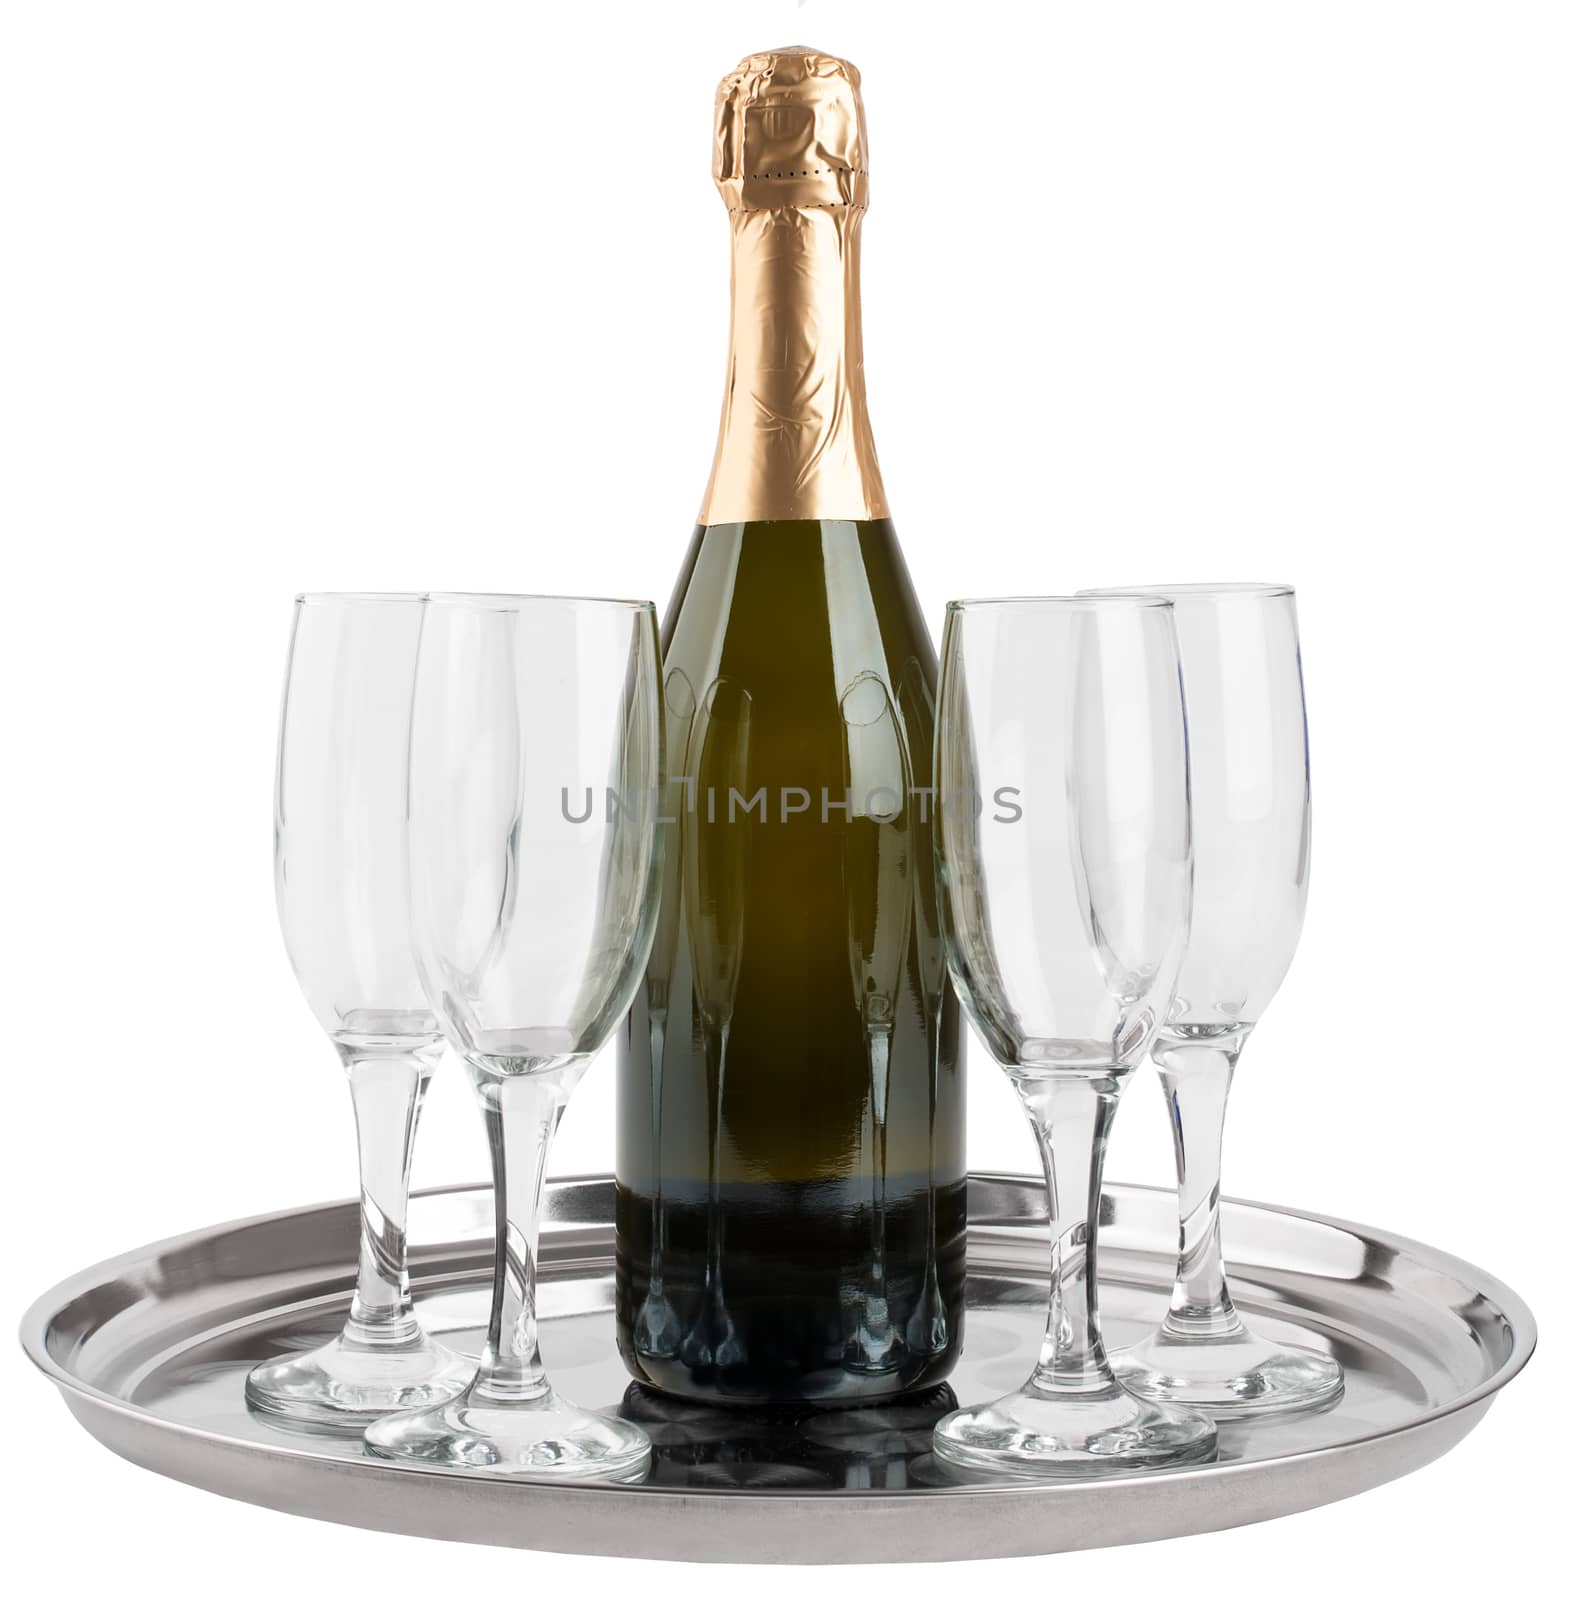 Champagne bottle and four champagne glasses on tray isolated on white background